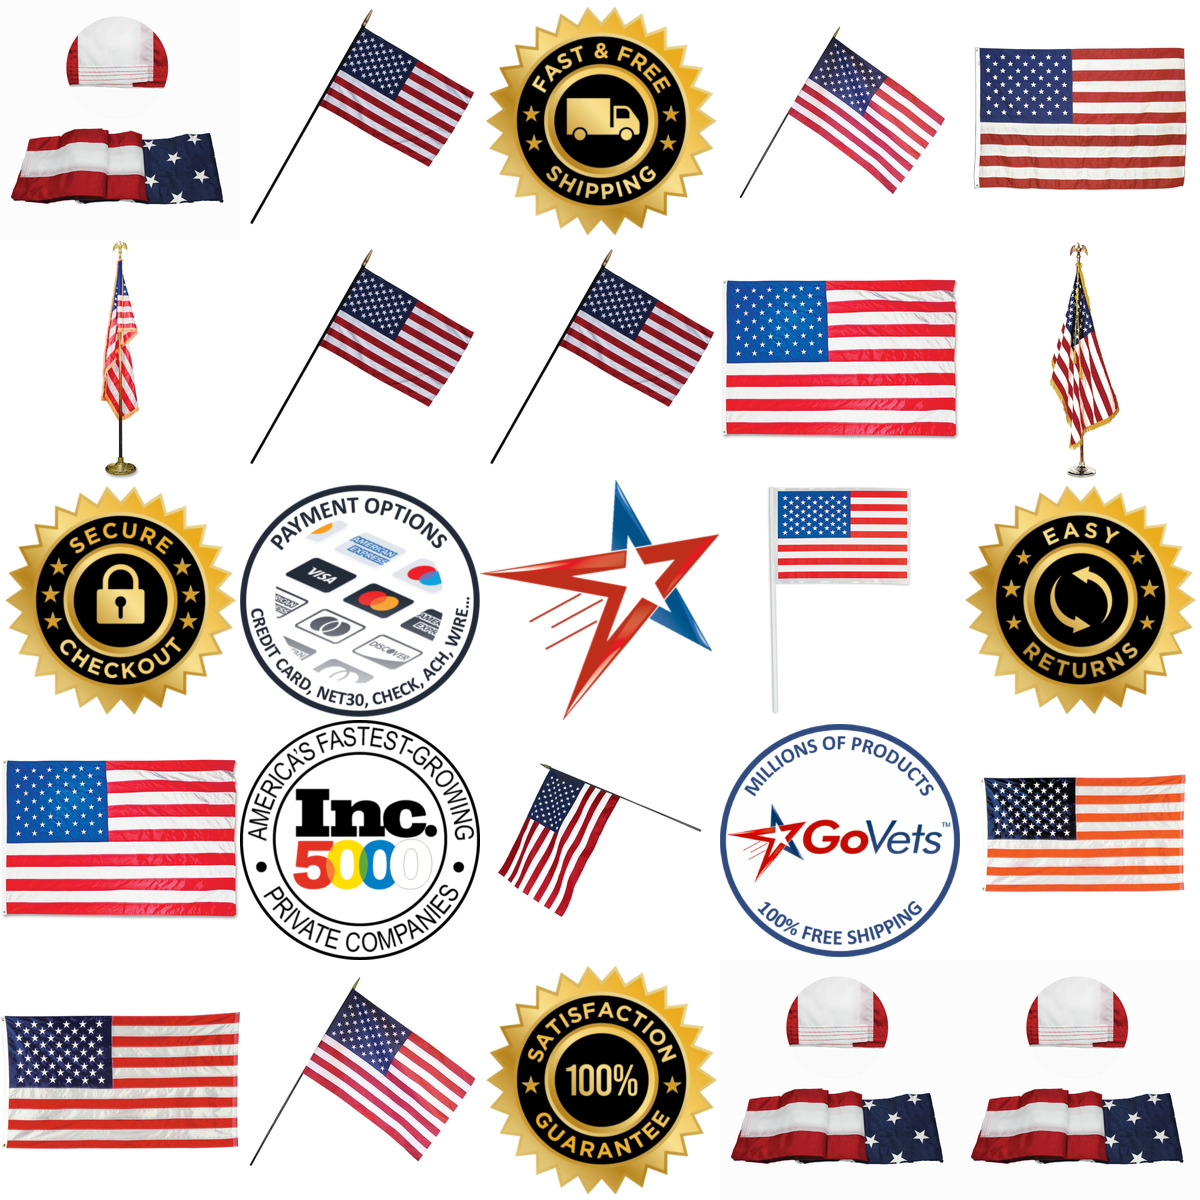 A selection of Flags products on GoVets